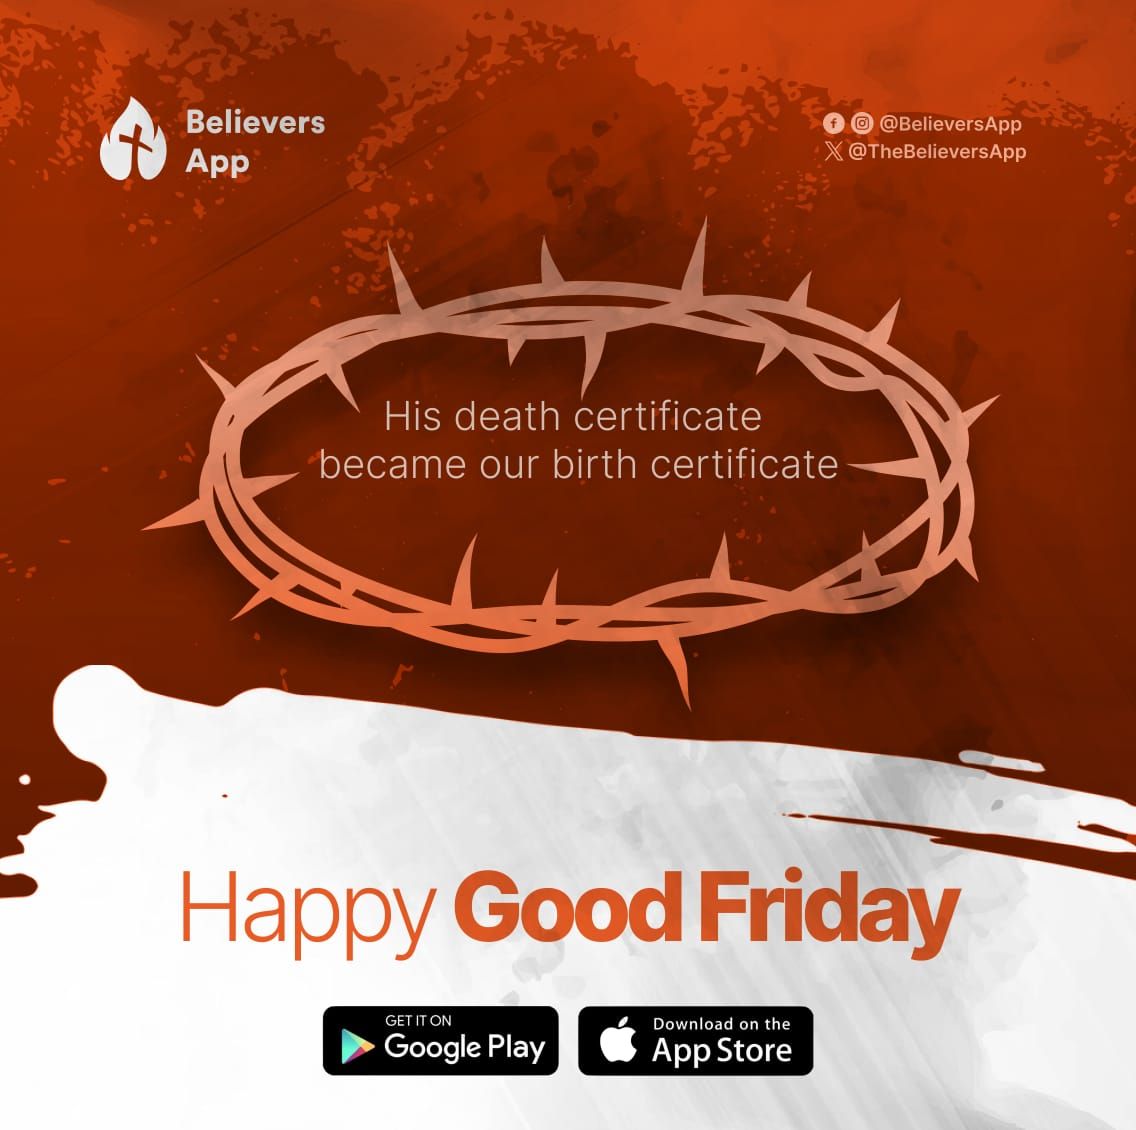 Jesus' death certificate became our birth certificate into the family of God.

Happy Good Friday!

#Believersapp
#HappyGoodFriday
#Jesusisalife